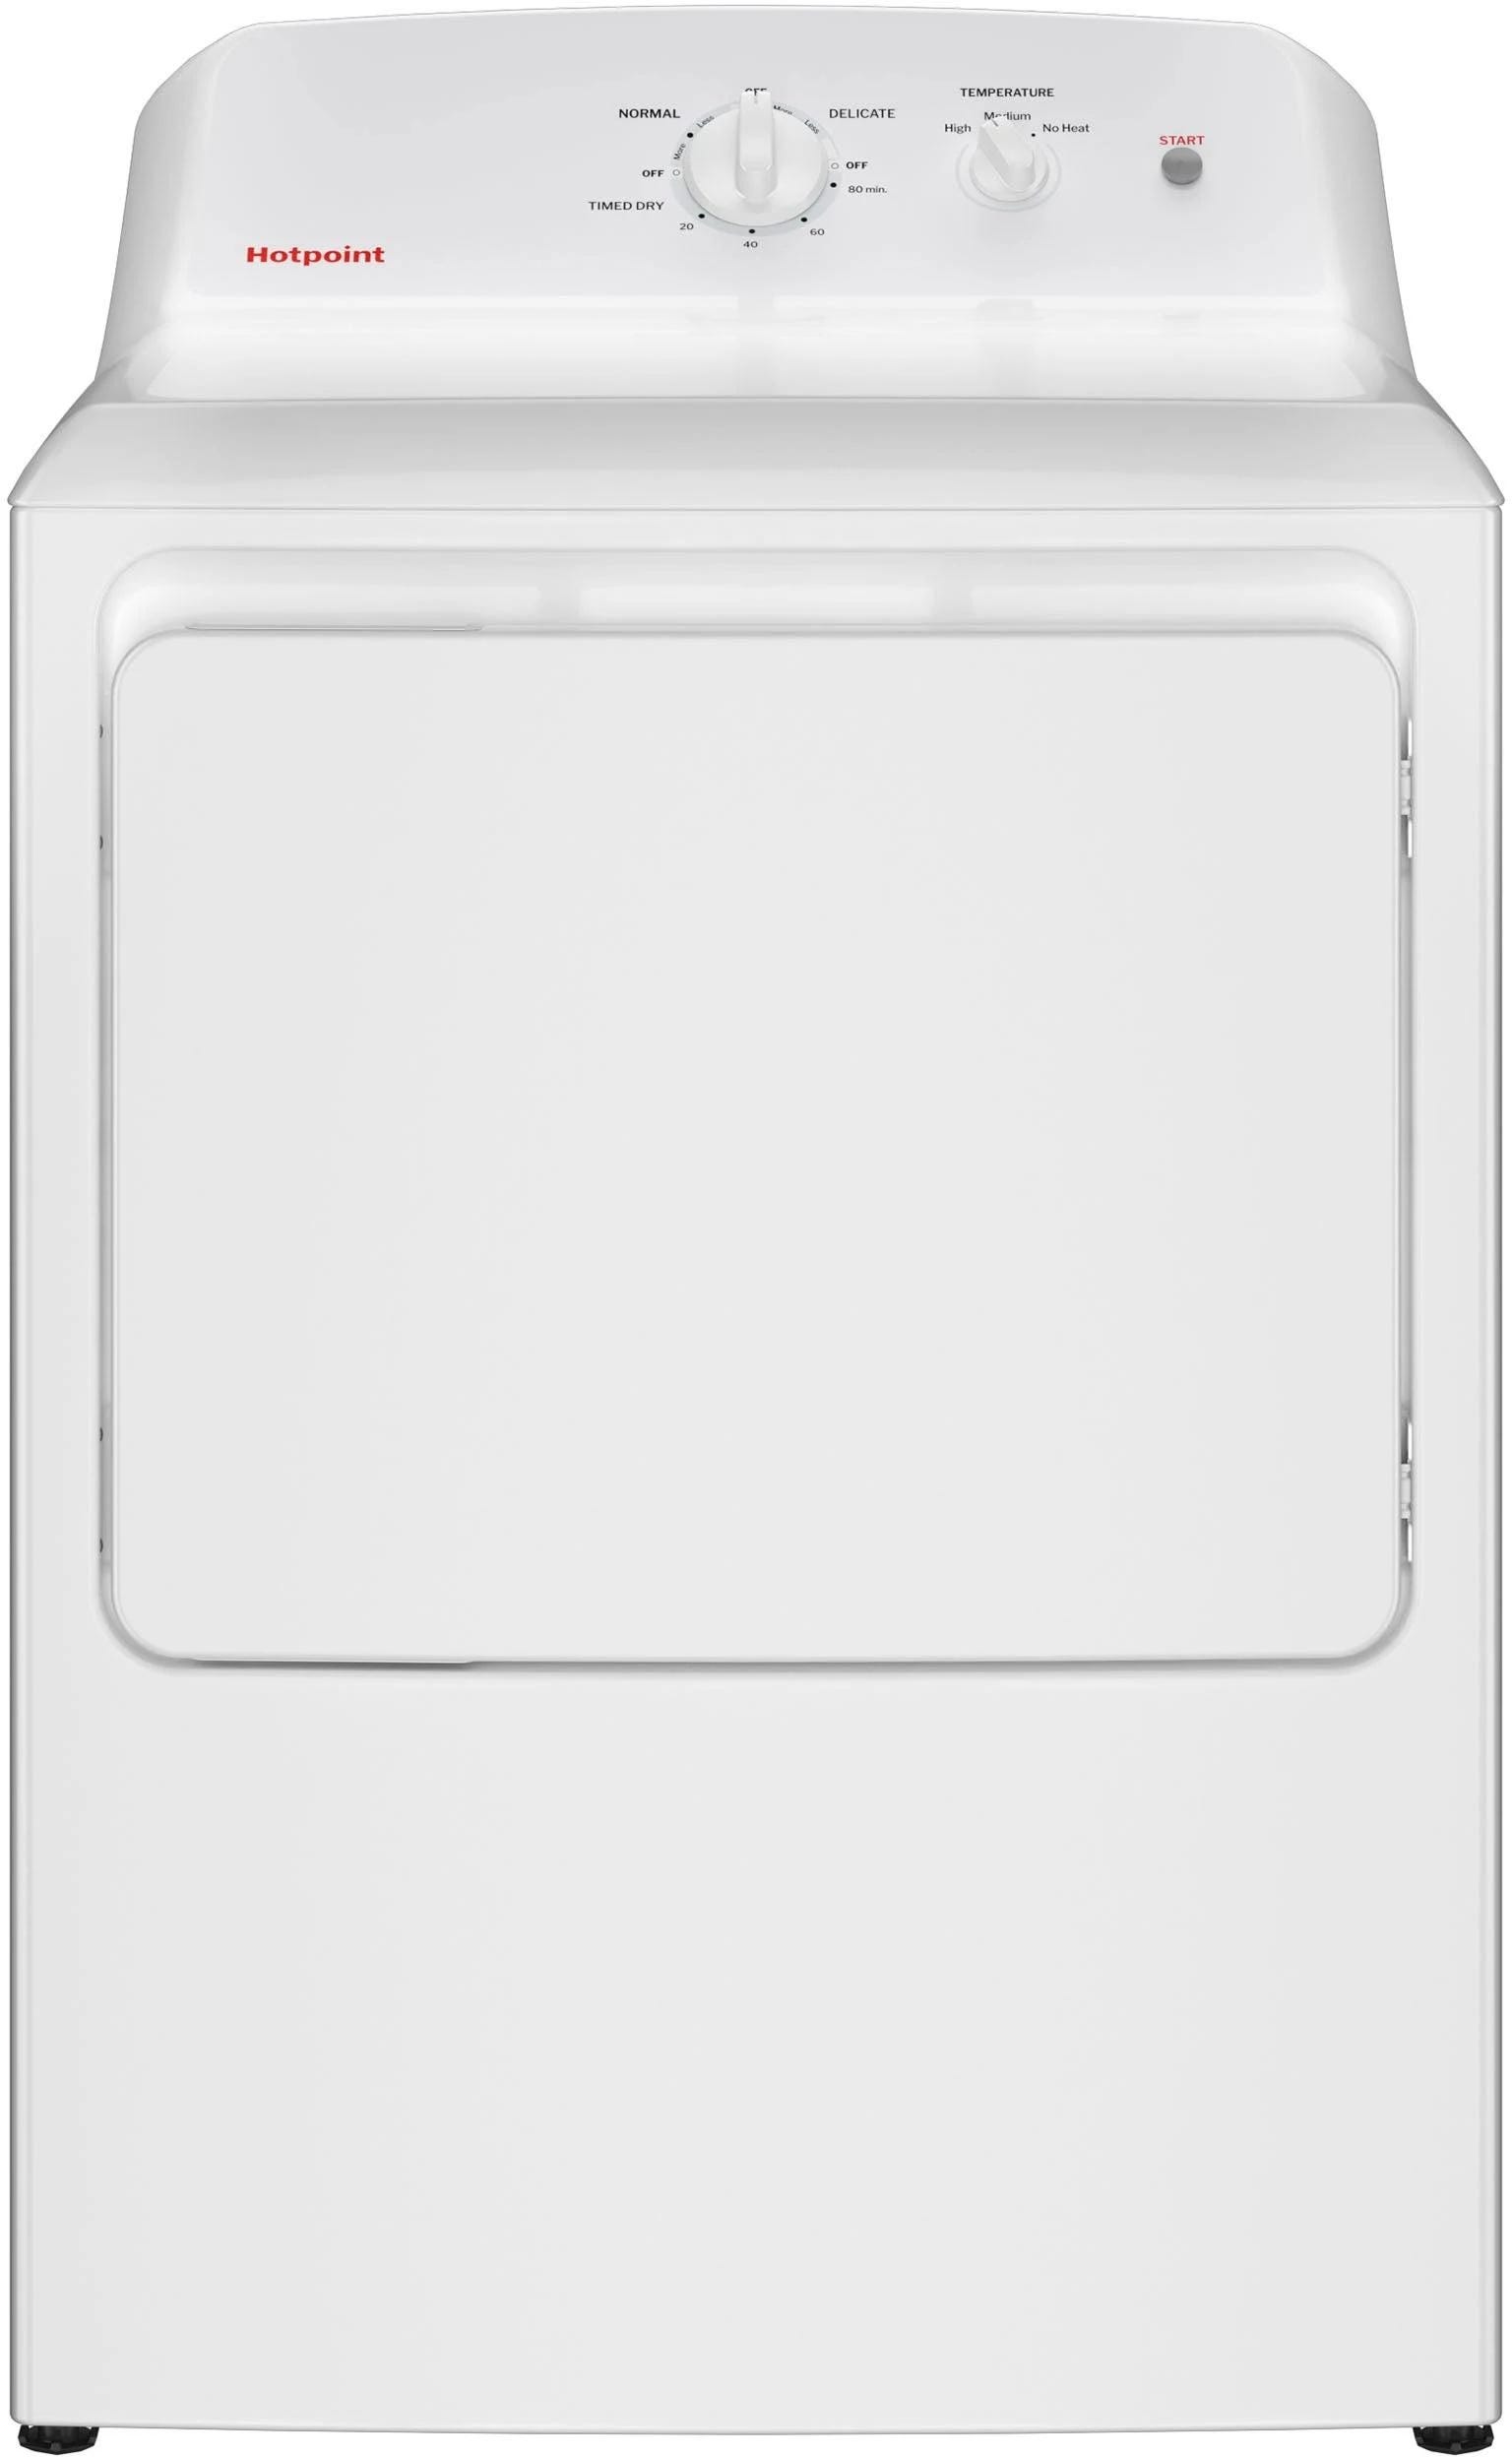 Hotpoint 6.2 Cu. ft. White Electric Dryer - Durable & Reliable Appliance for Busy Lives | Image